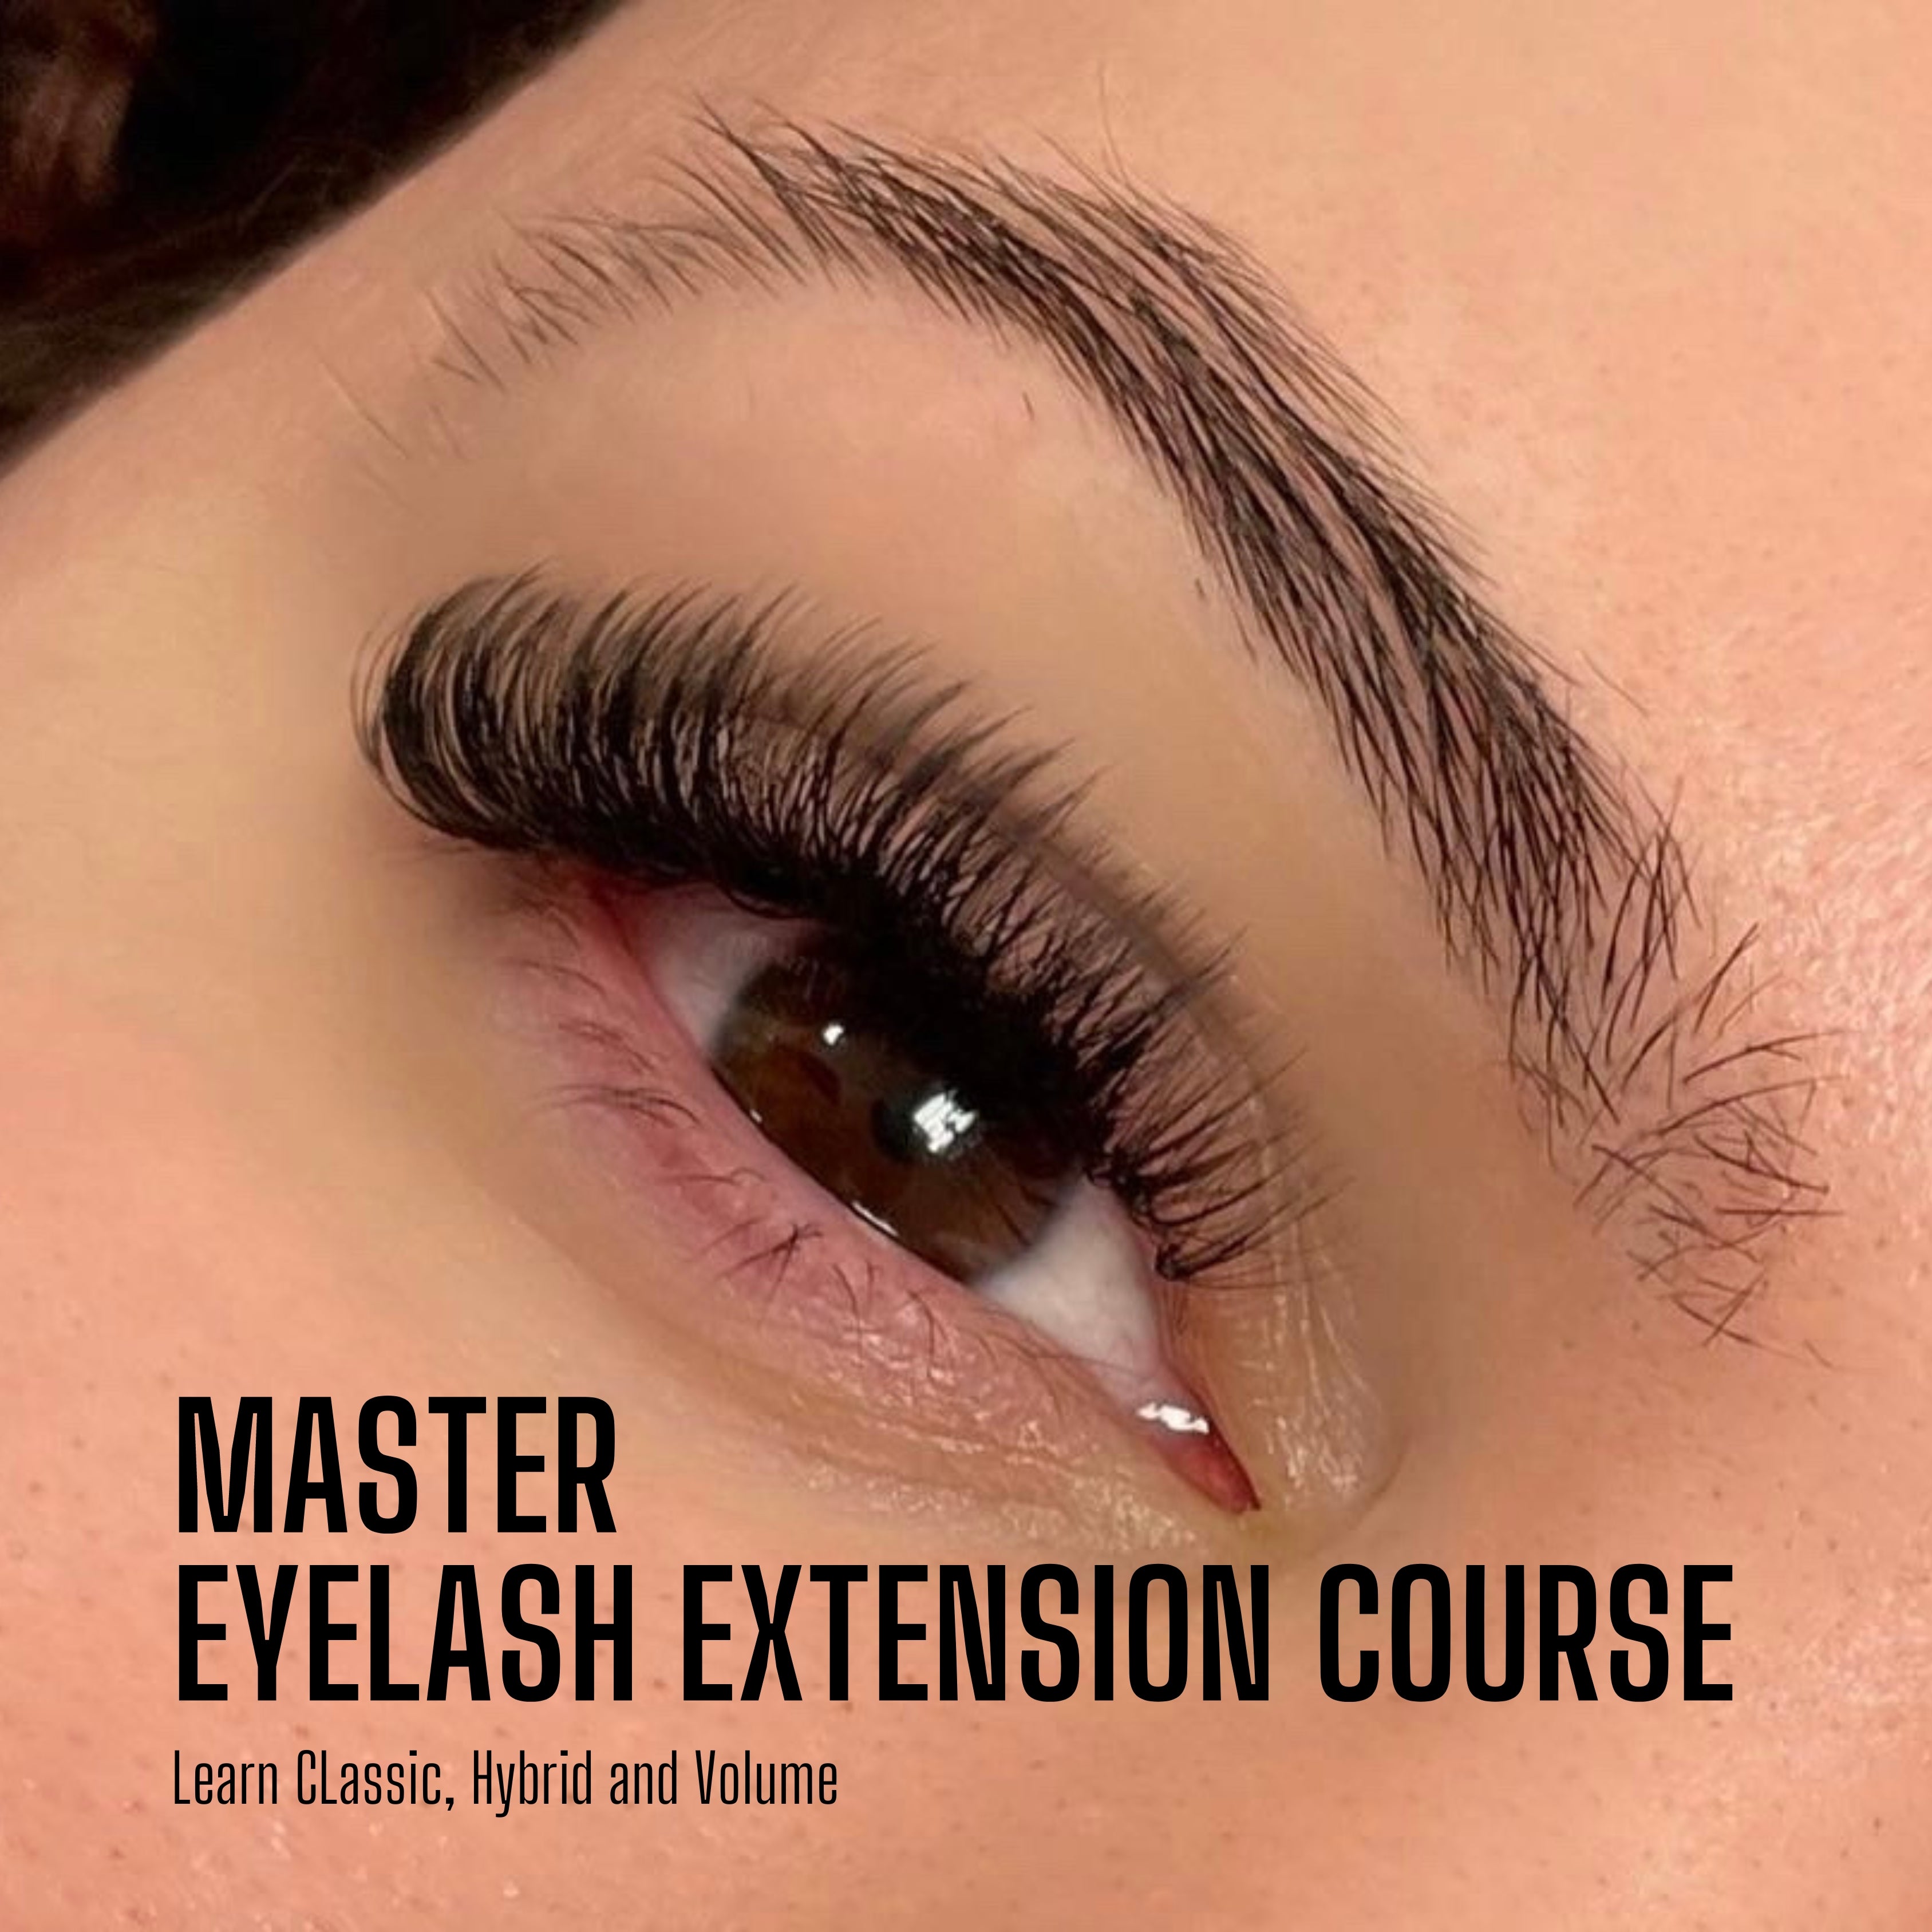 The Ultimate Lash Course Bundle - With Starter Kits